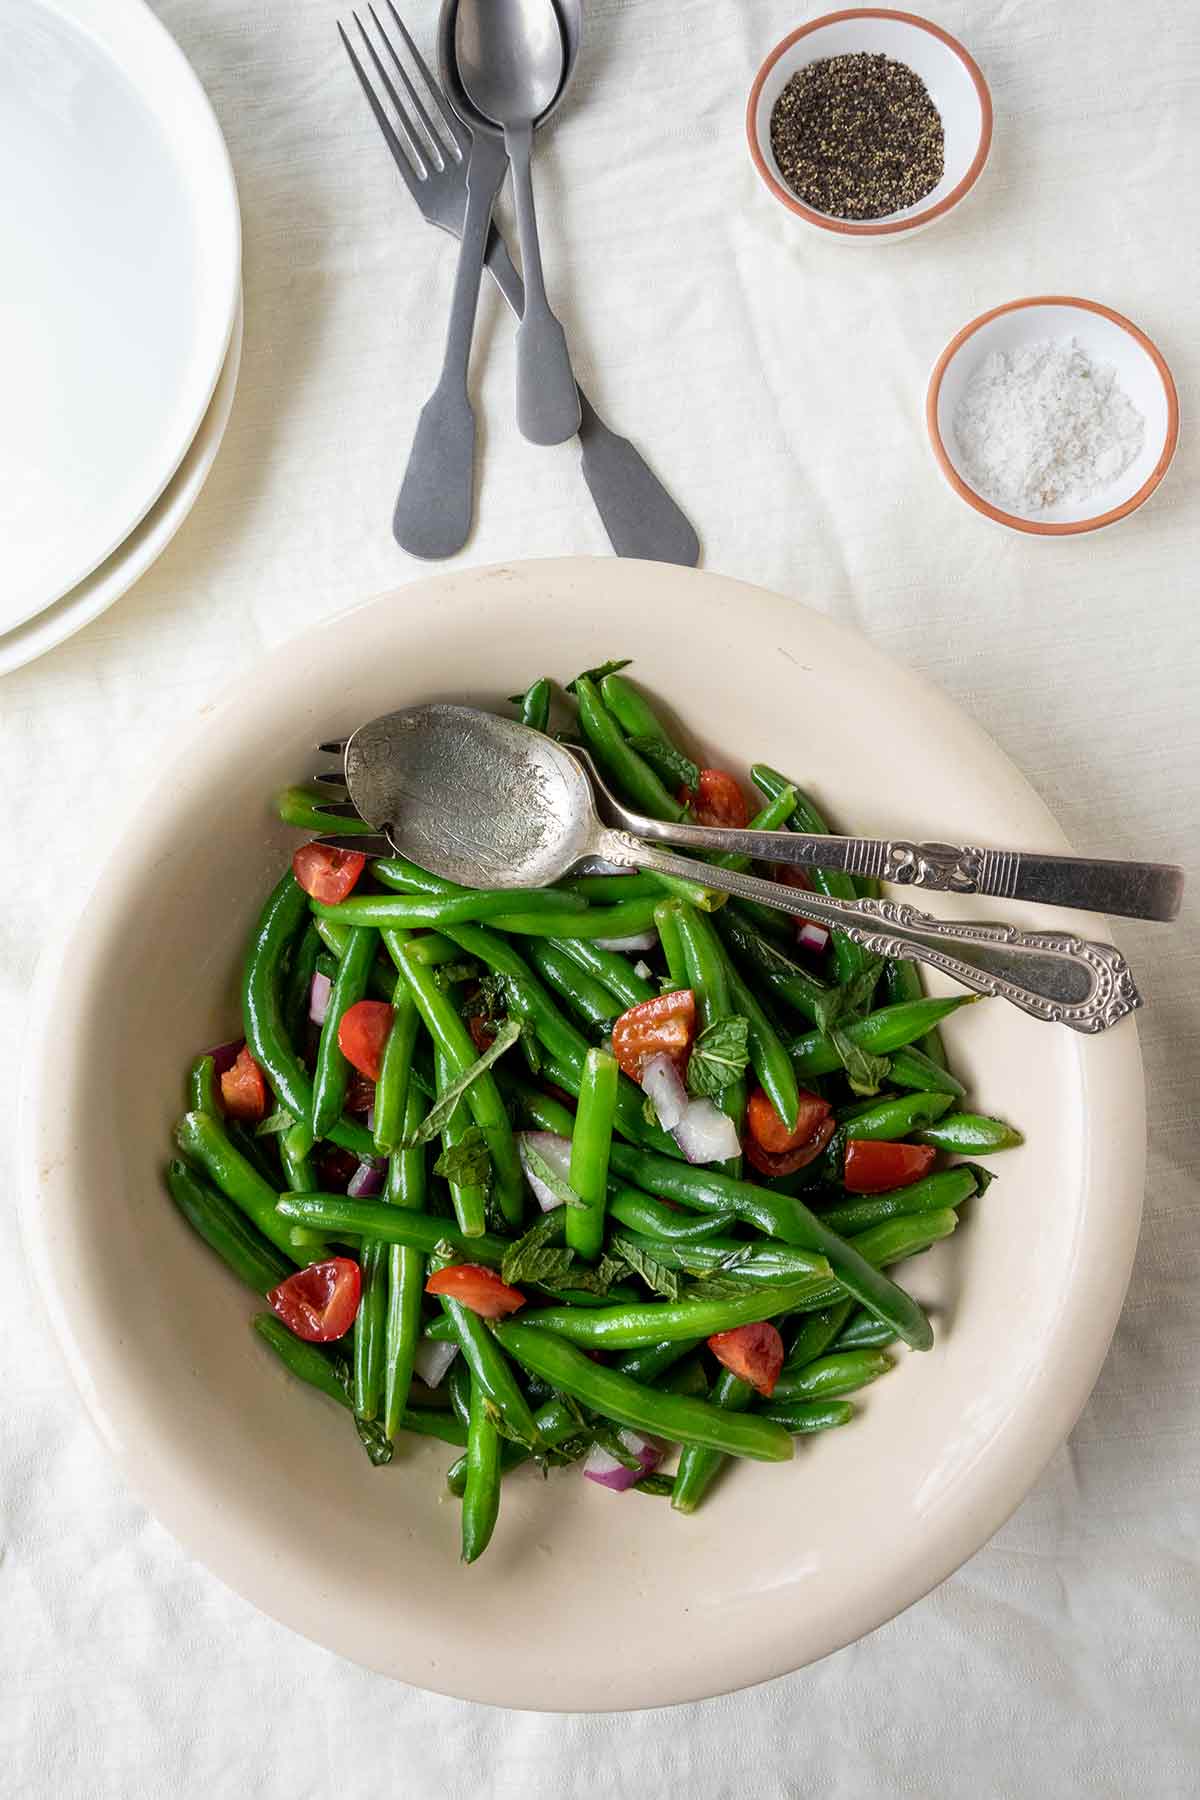 A bowl of green bean salad with mint and tomatoes with two plates, utensils, and a dish of pepper in the background.